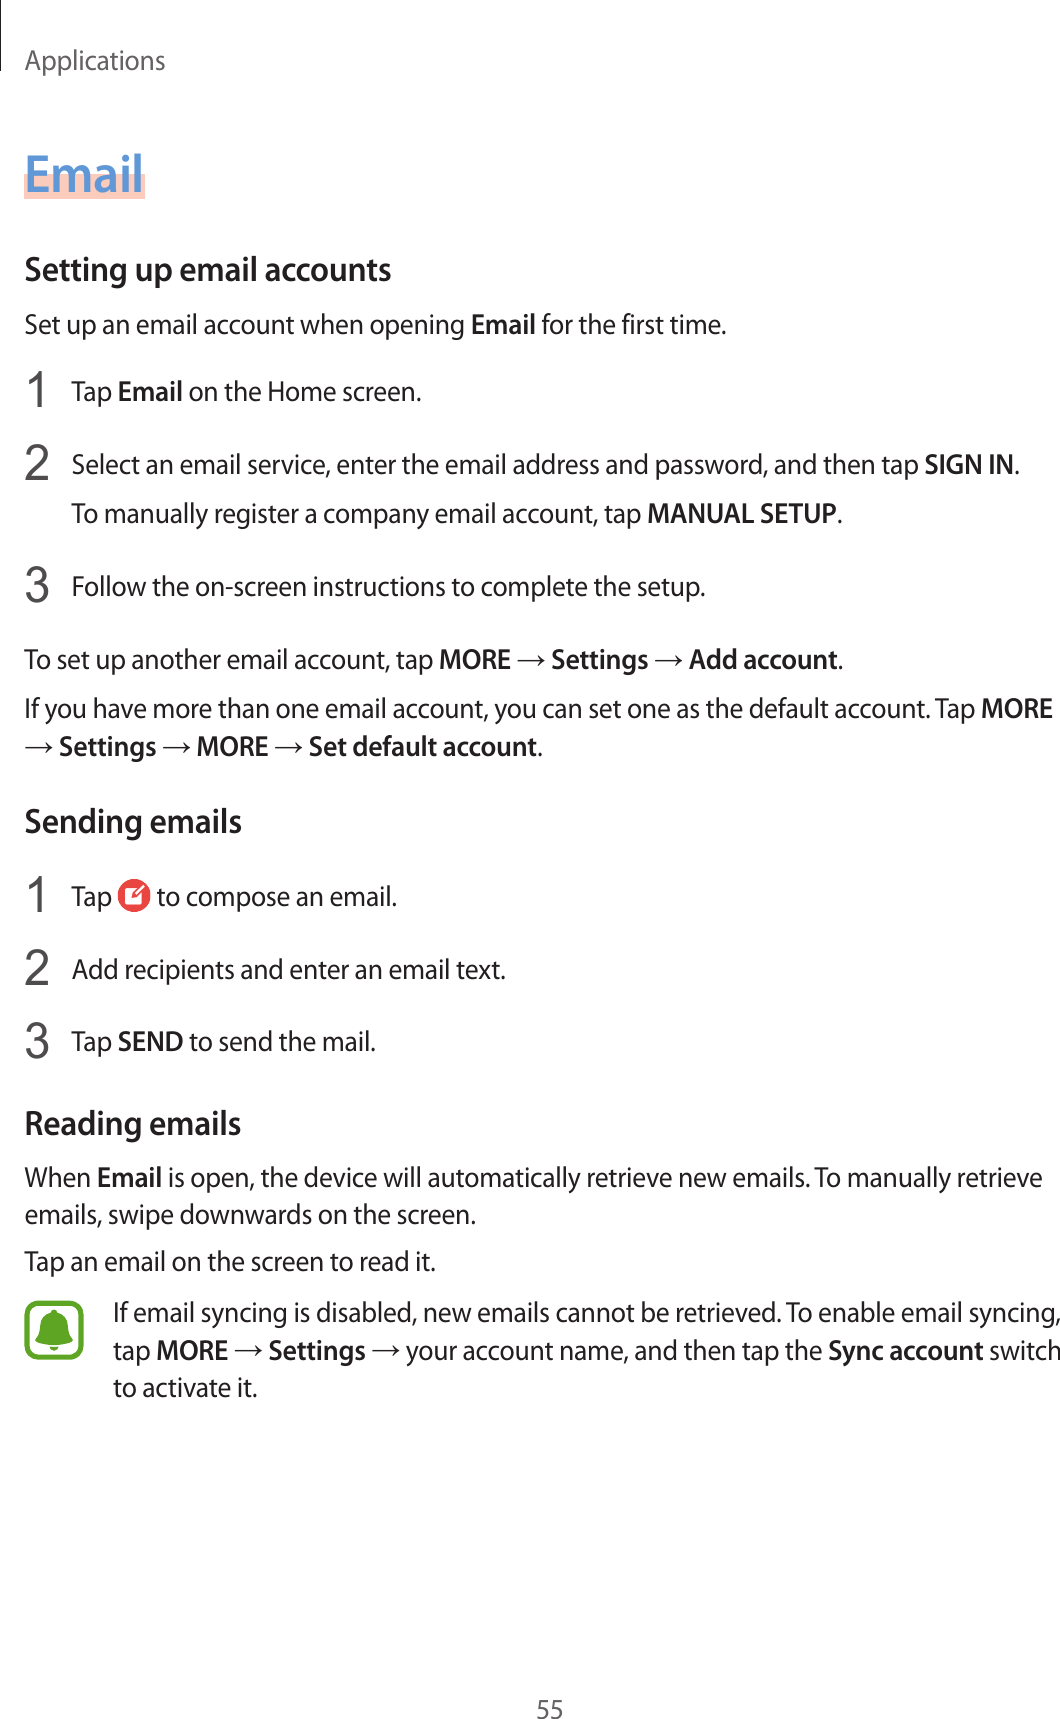 Applications55EmailSetting up email accountsSet up an email account when opening Email for the first time.1  Tap Email on the Home screen.2  Select an email service, enter the email address and password, and then tap SIGN IN.To manually register a company email account, tap MANUAL SETUP.3  Follow the on-screen instructions to complete the setup.To set up another email account, tap MORE → Settings → Add account.If you have more than one email account, you can set one as the default account. Tap MORE → Settings → MORE → Set default account.Sending emails1  Tap   to compose an email.2  Add recipients and enter an email text.3  Tap SEND to send the mail.Reading emailsWhen Email is open, the device will automatically retrieve new emails. To manually retrieve emails, swipe downwards on the screen.Tap an email on the screen to read it.If email syncing is disabled, new emails cannot be retrieved. To enable email syncing, tap MORE → Settings → your account name, and then tap the Sync account switch to activate it.